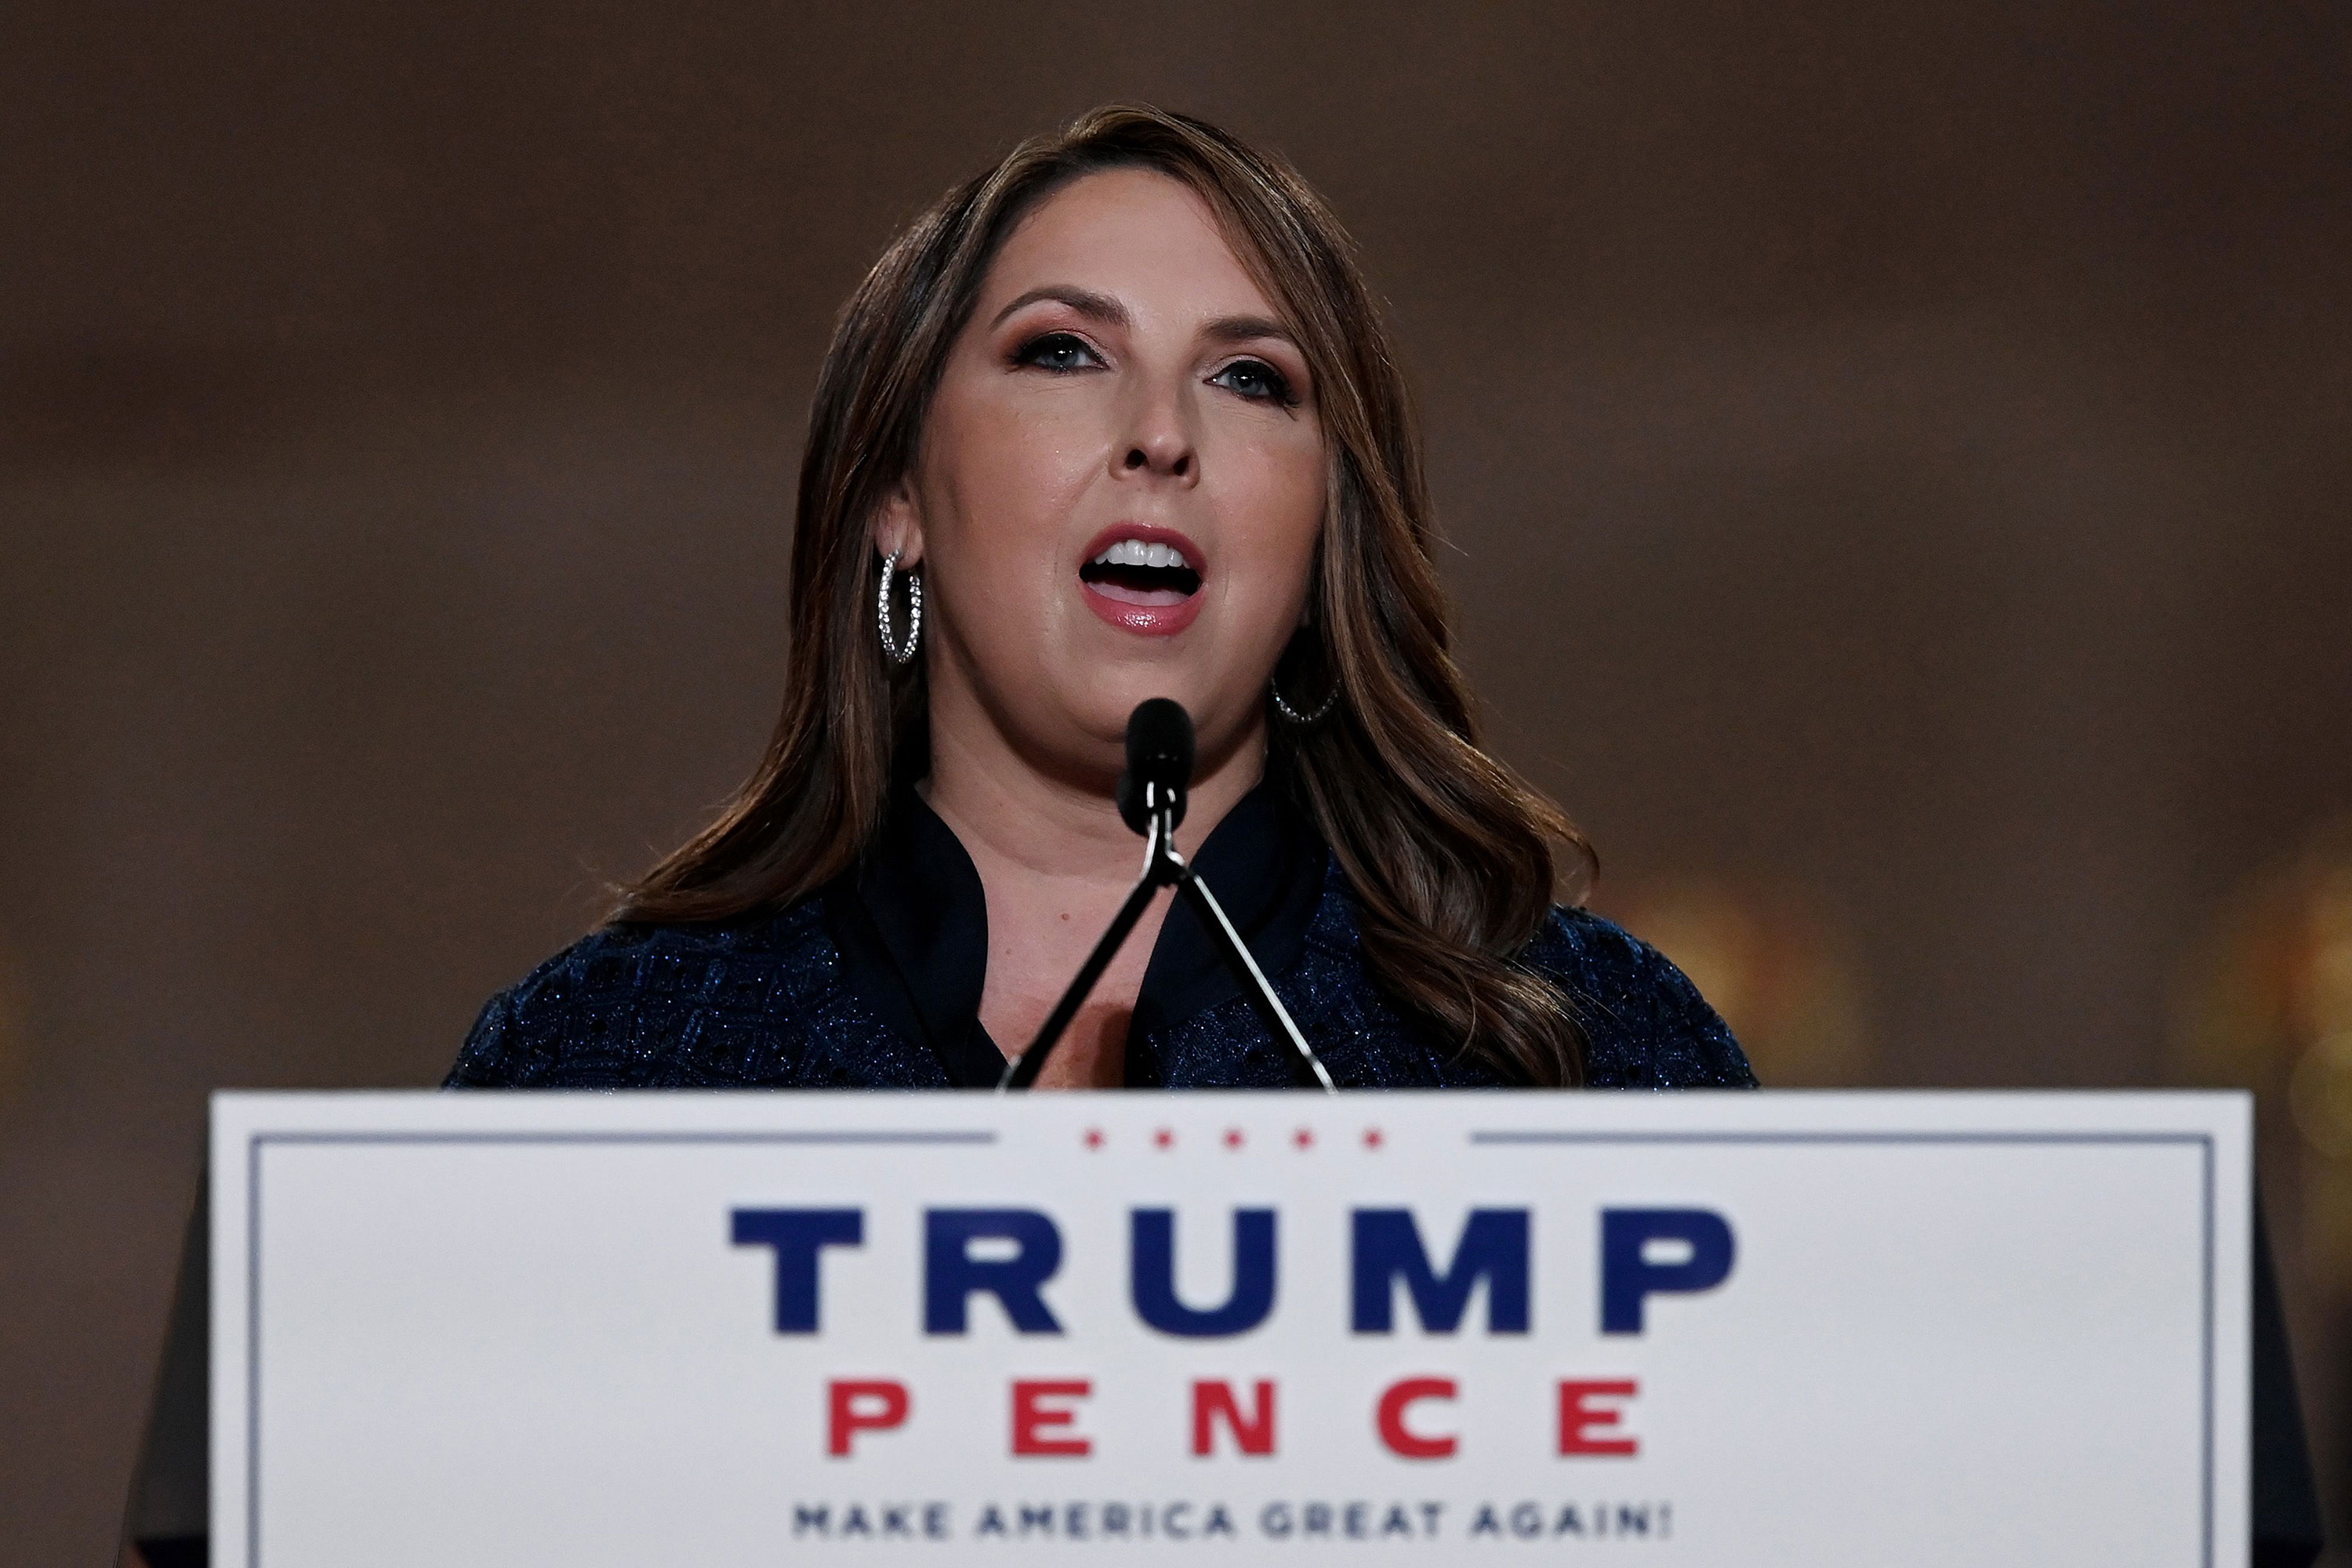 Republican National Committee Chair Ronna McDaniel speaks during the first day of the Republican convention on August 24 in Washington DC.